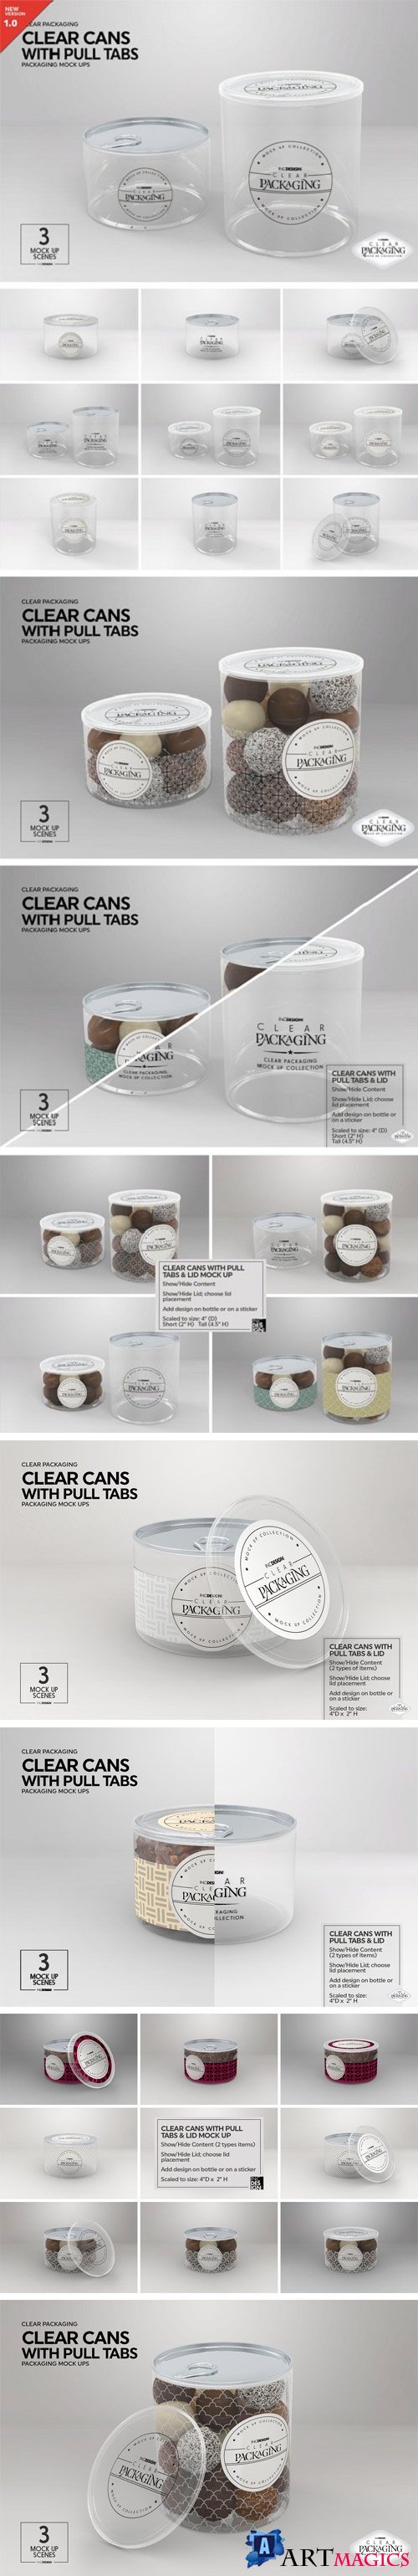 Clear Cans with Pull Tabs Mock Up - 2218686